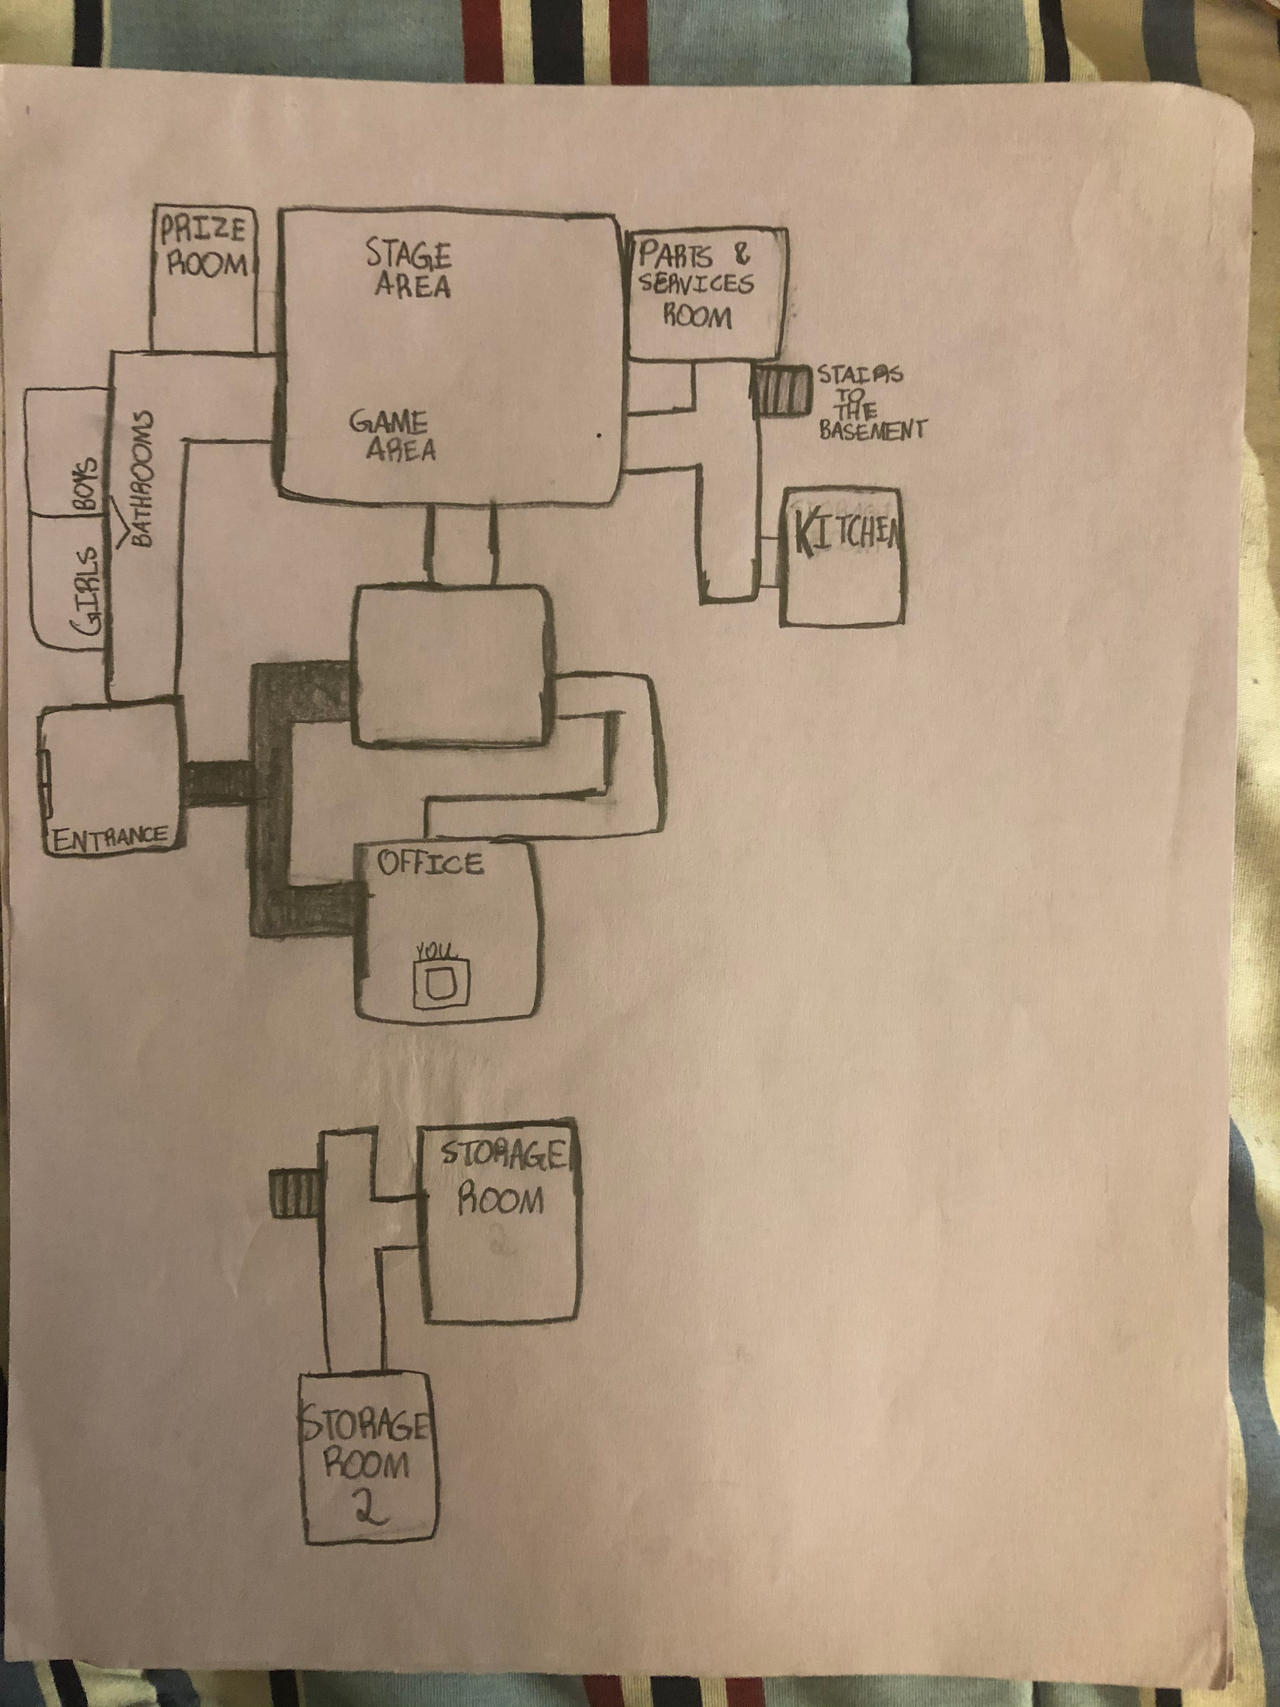 The layout of my own FNaF map by CGraves09 on DeviantArt